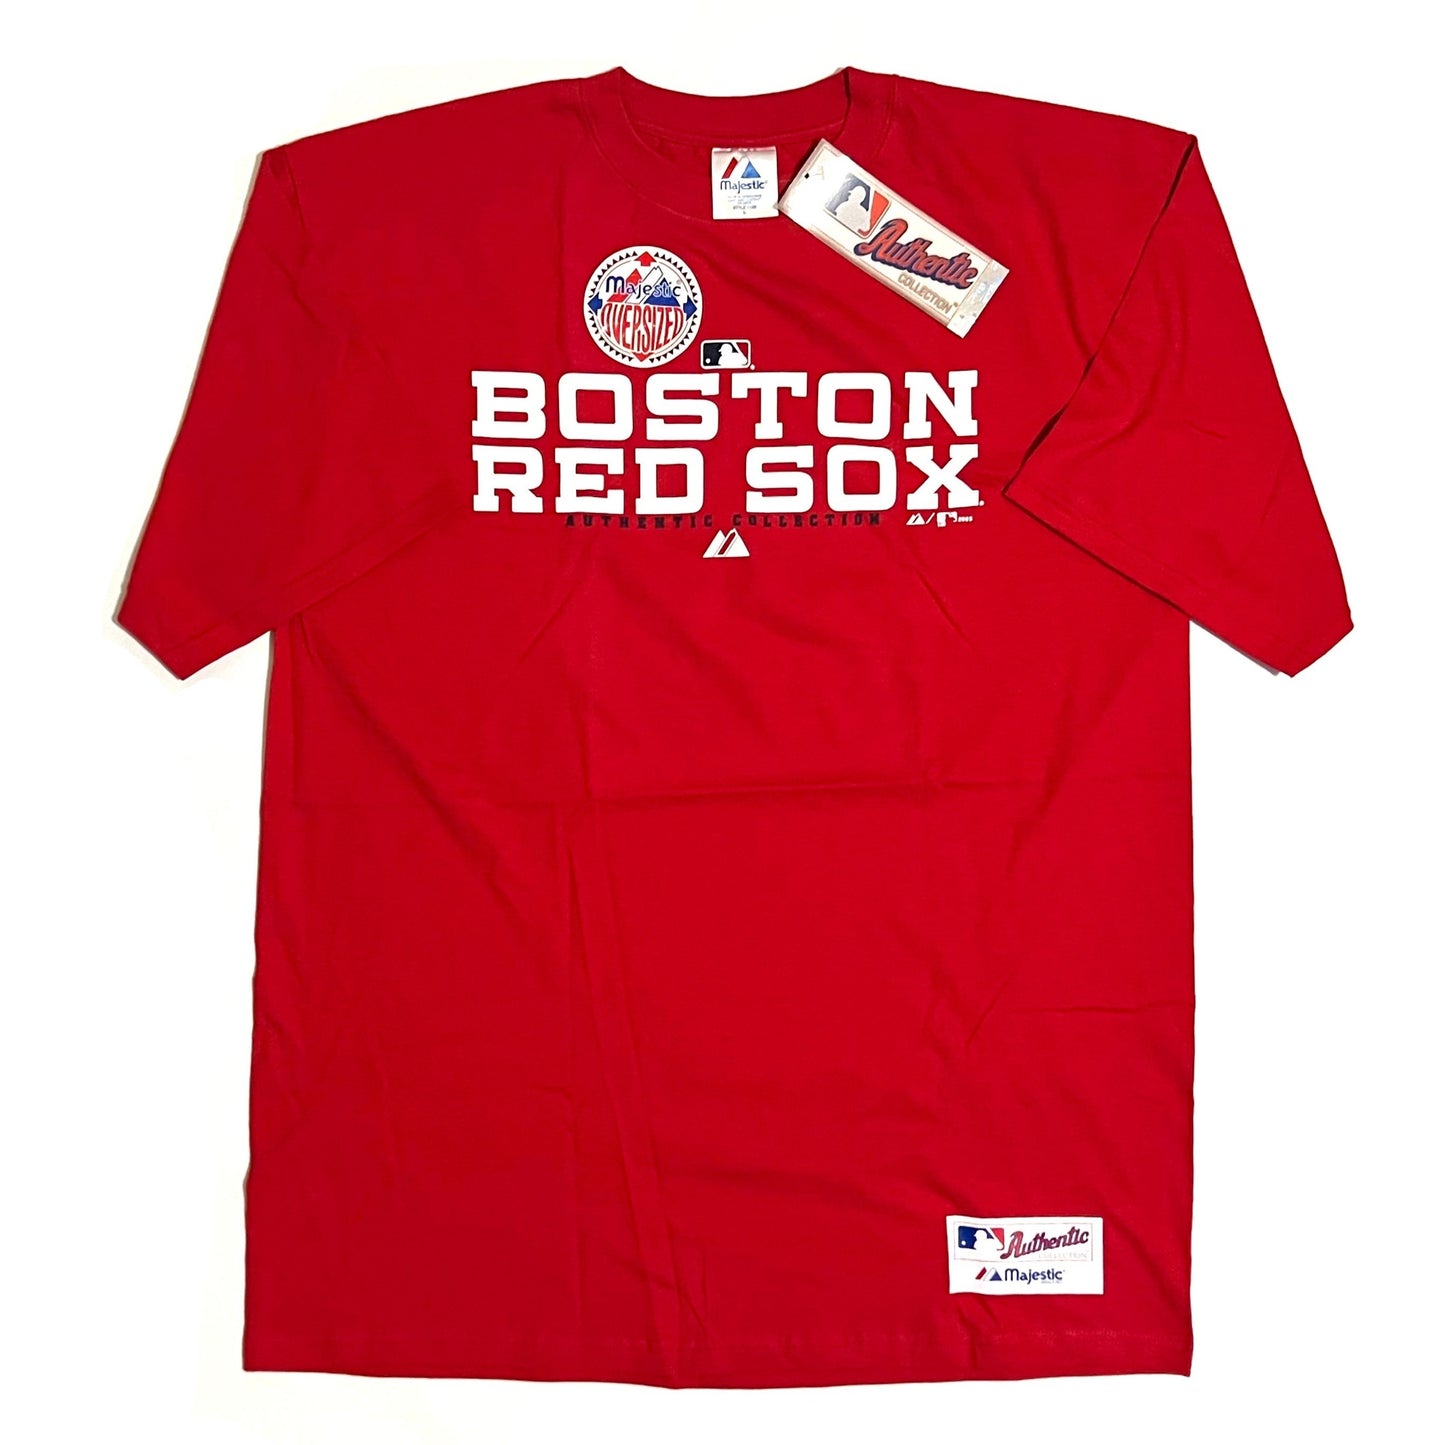 2005 Boston Red Sox Majestic Authentic Collection Oversized Shirt - L